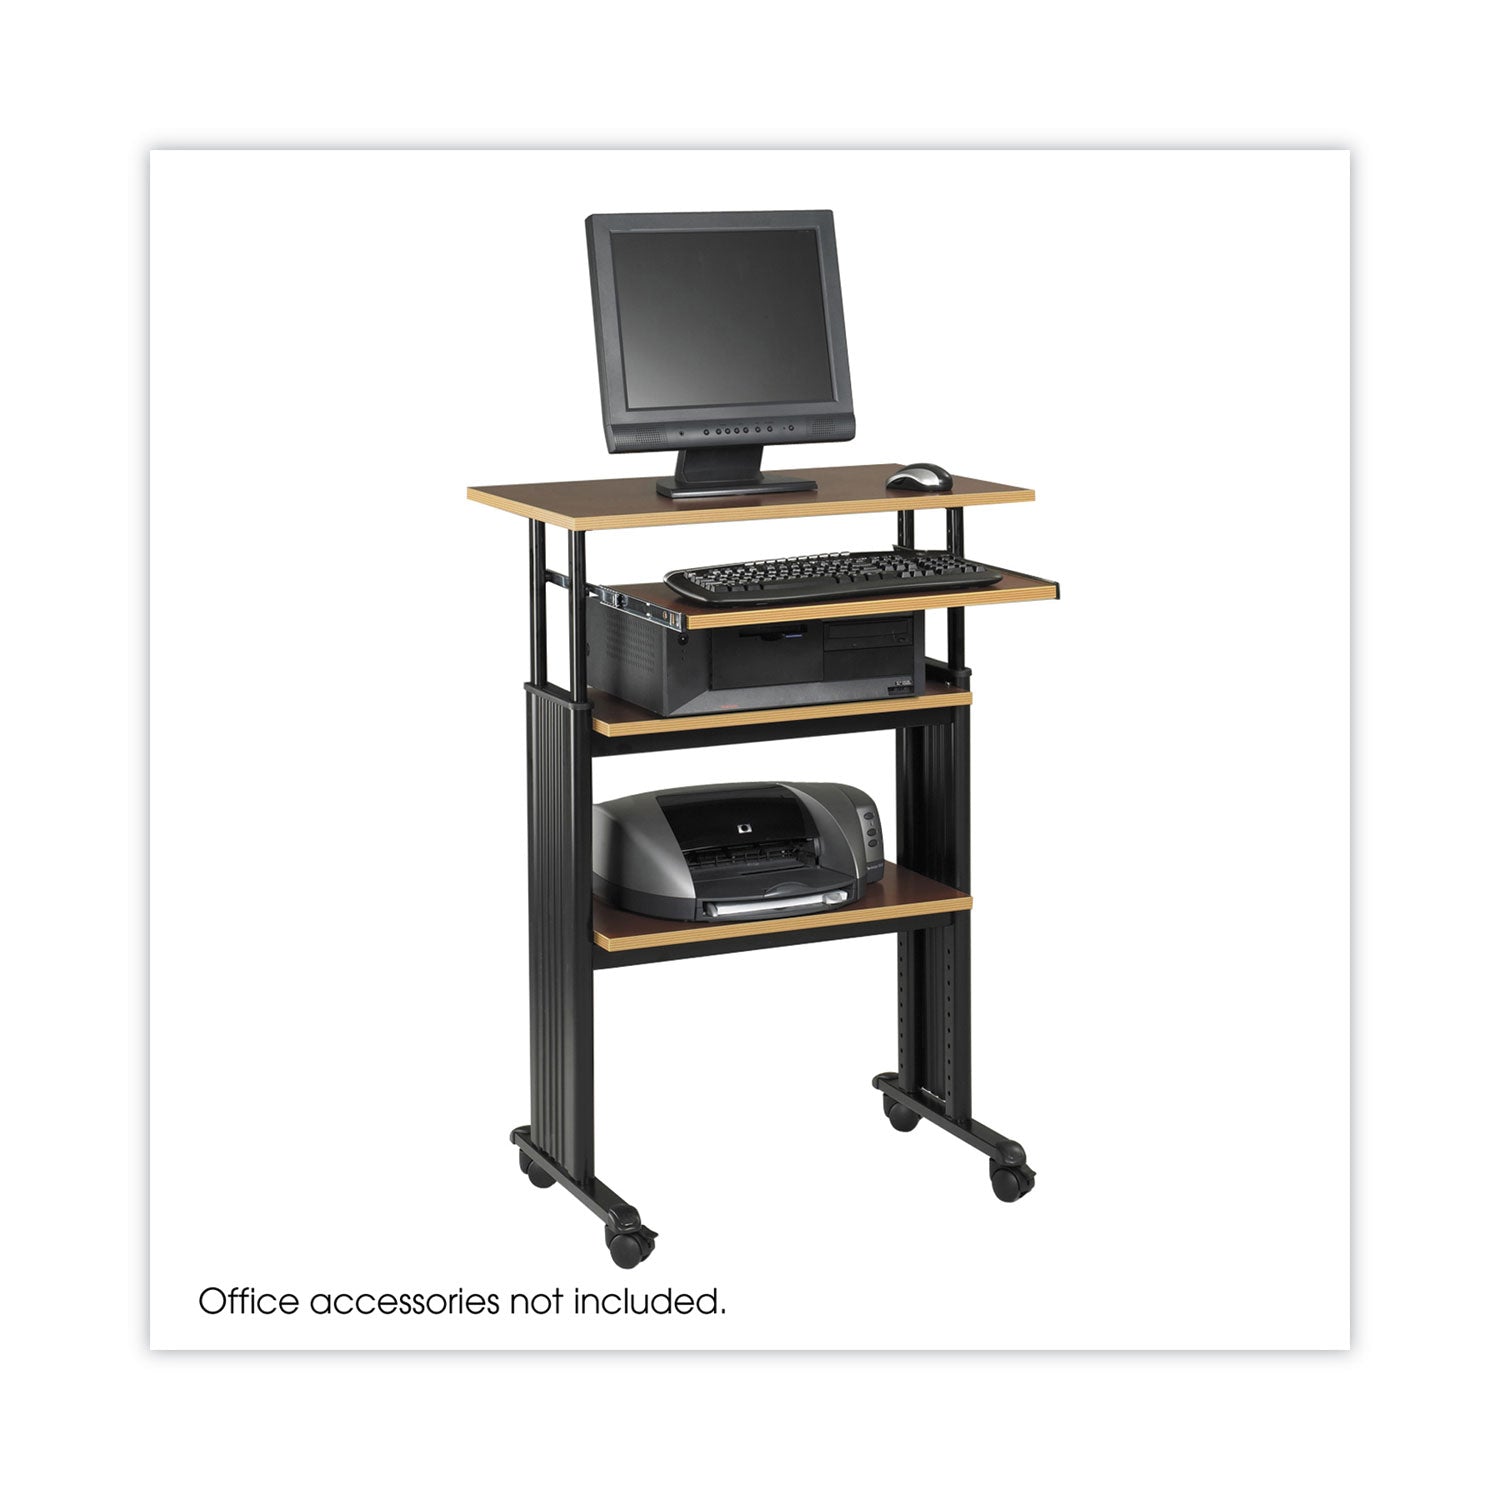 Muv Stand-Up Adjustable-Height Desk, 29.5" x 22" x 35" to 49", Cherry/Black - 